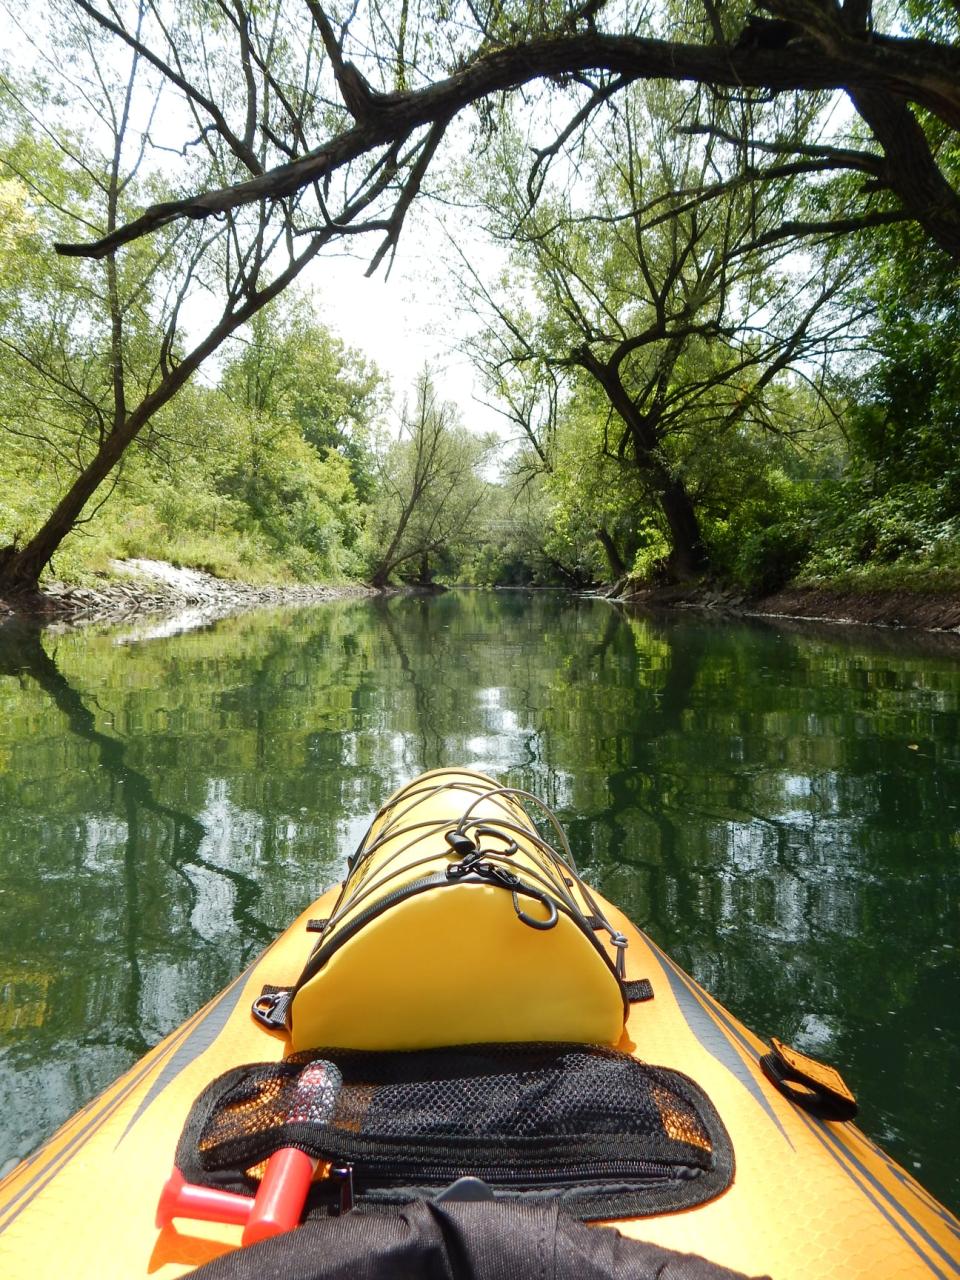 The bow of a kayak pointing down a calm river with trees overhanging the water.